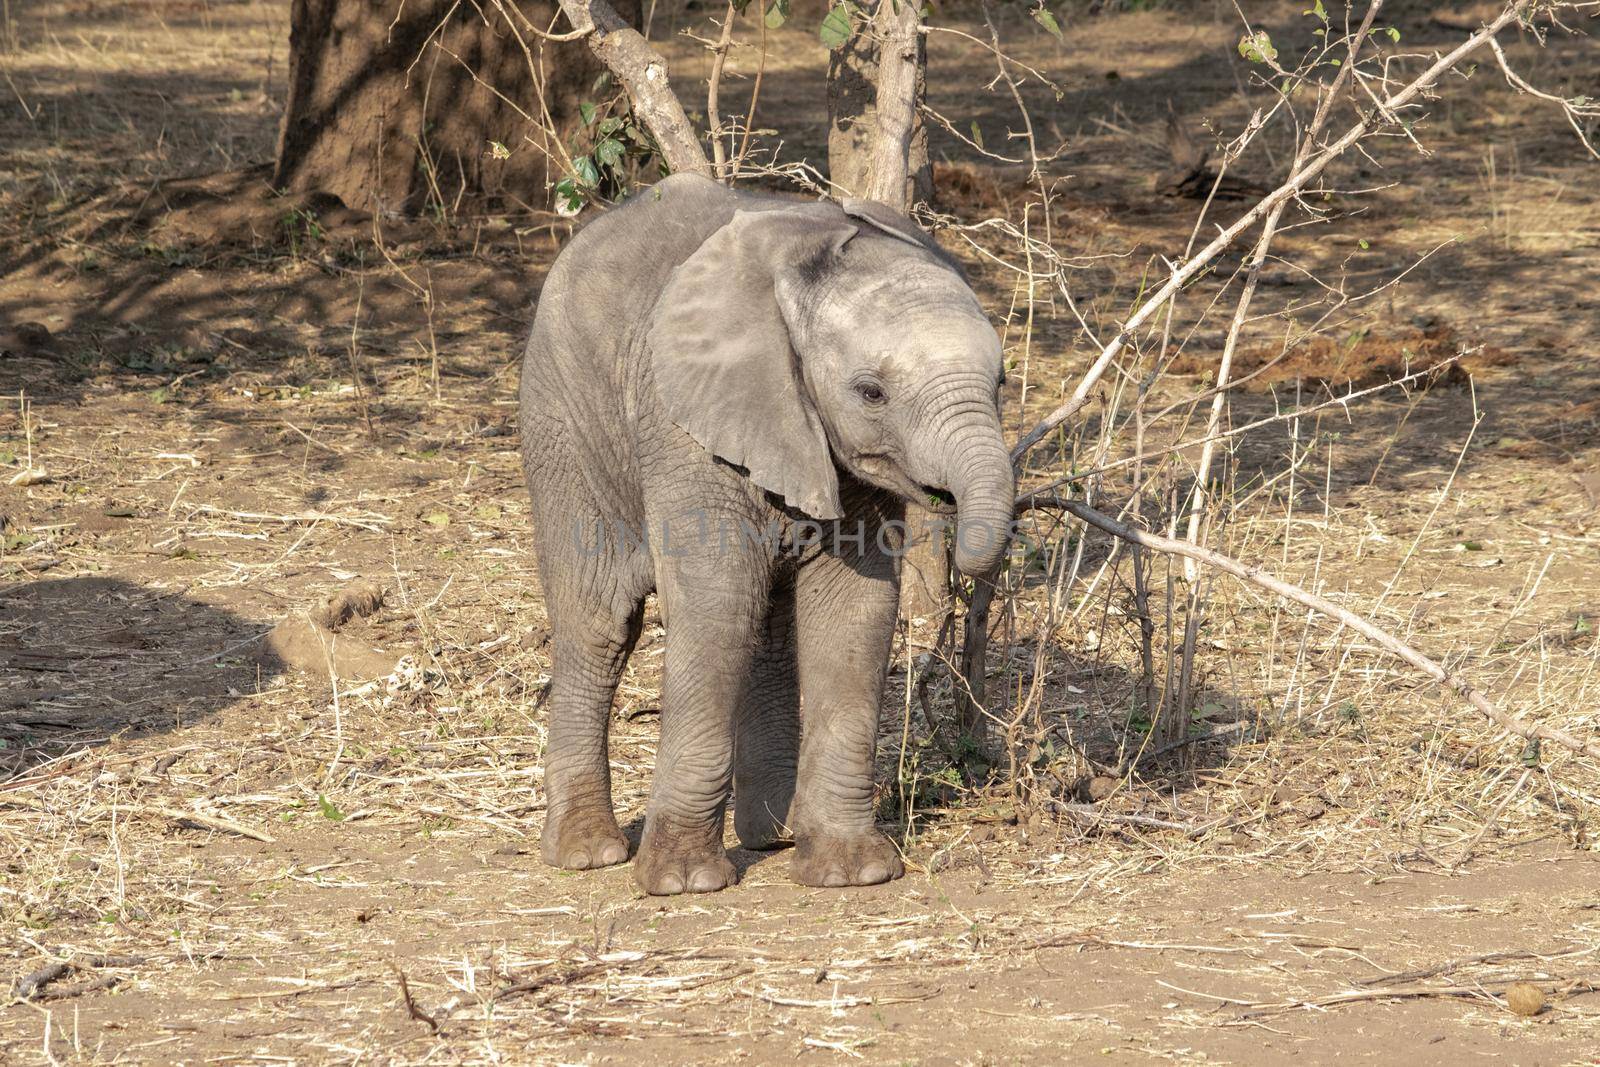 An amazing close up of an elephant cub on the sandy banks of an African river